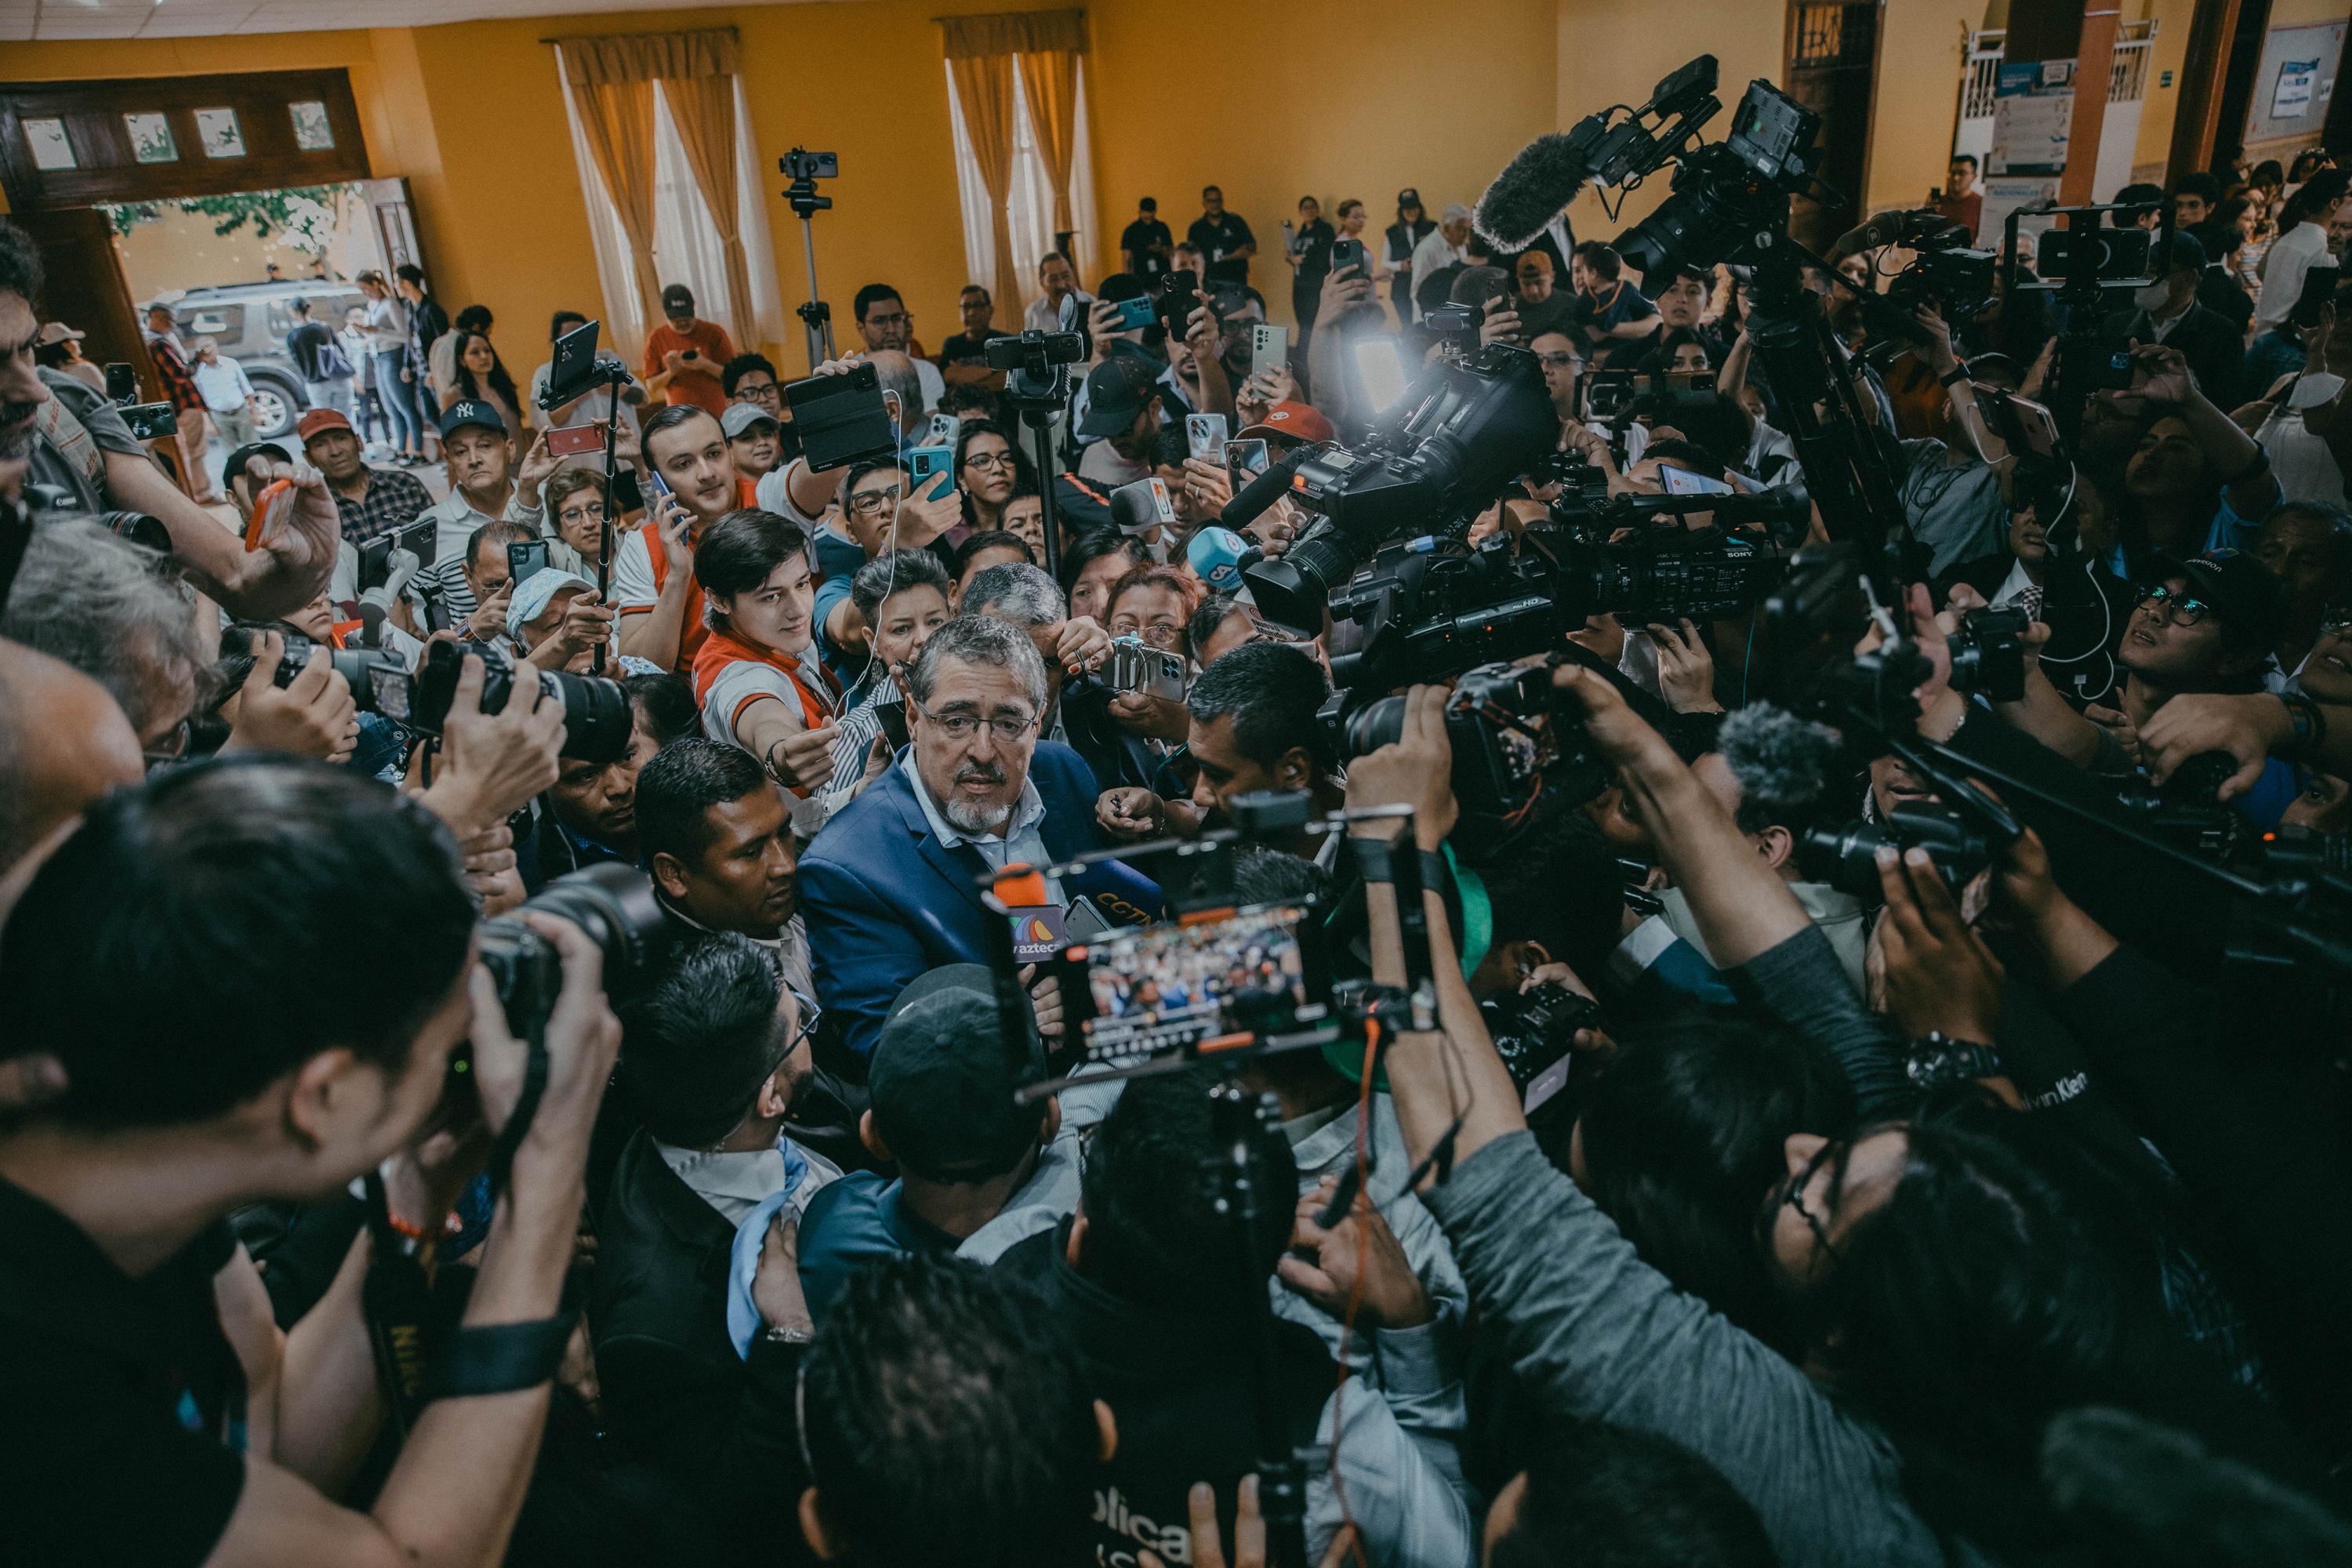 When he voted in the first-round elections, Arévalo strolled into the polling station with barely any press around him. At the time, he was in eighth place in the polls. Two months later, on Sunday, August 20, his security team cleared space to let him get out of his vehicle, and Arévalo had to navigate his way through a scrum of journalists to cast his vote.